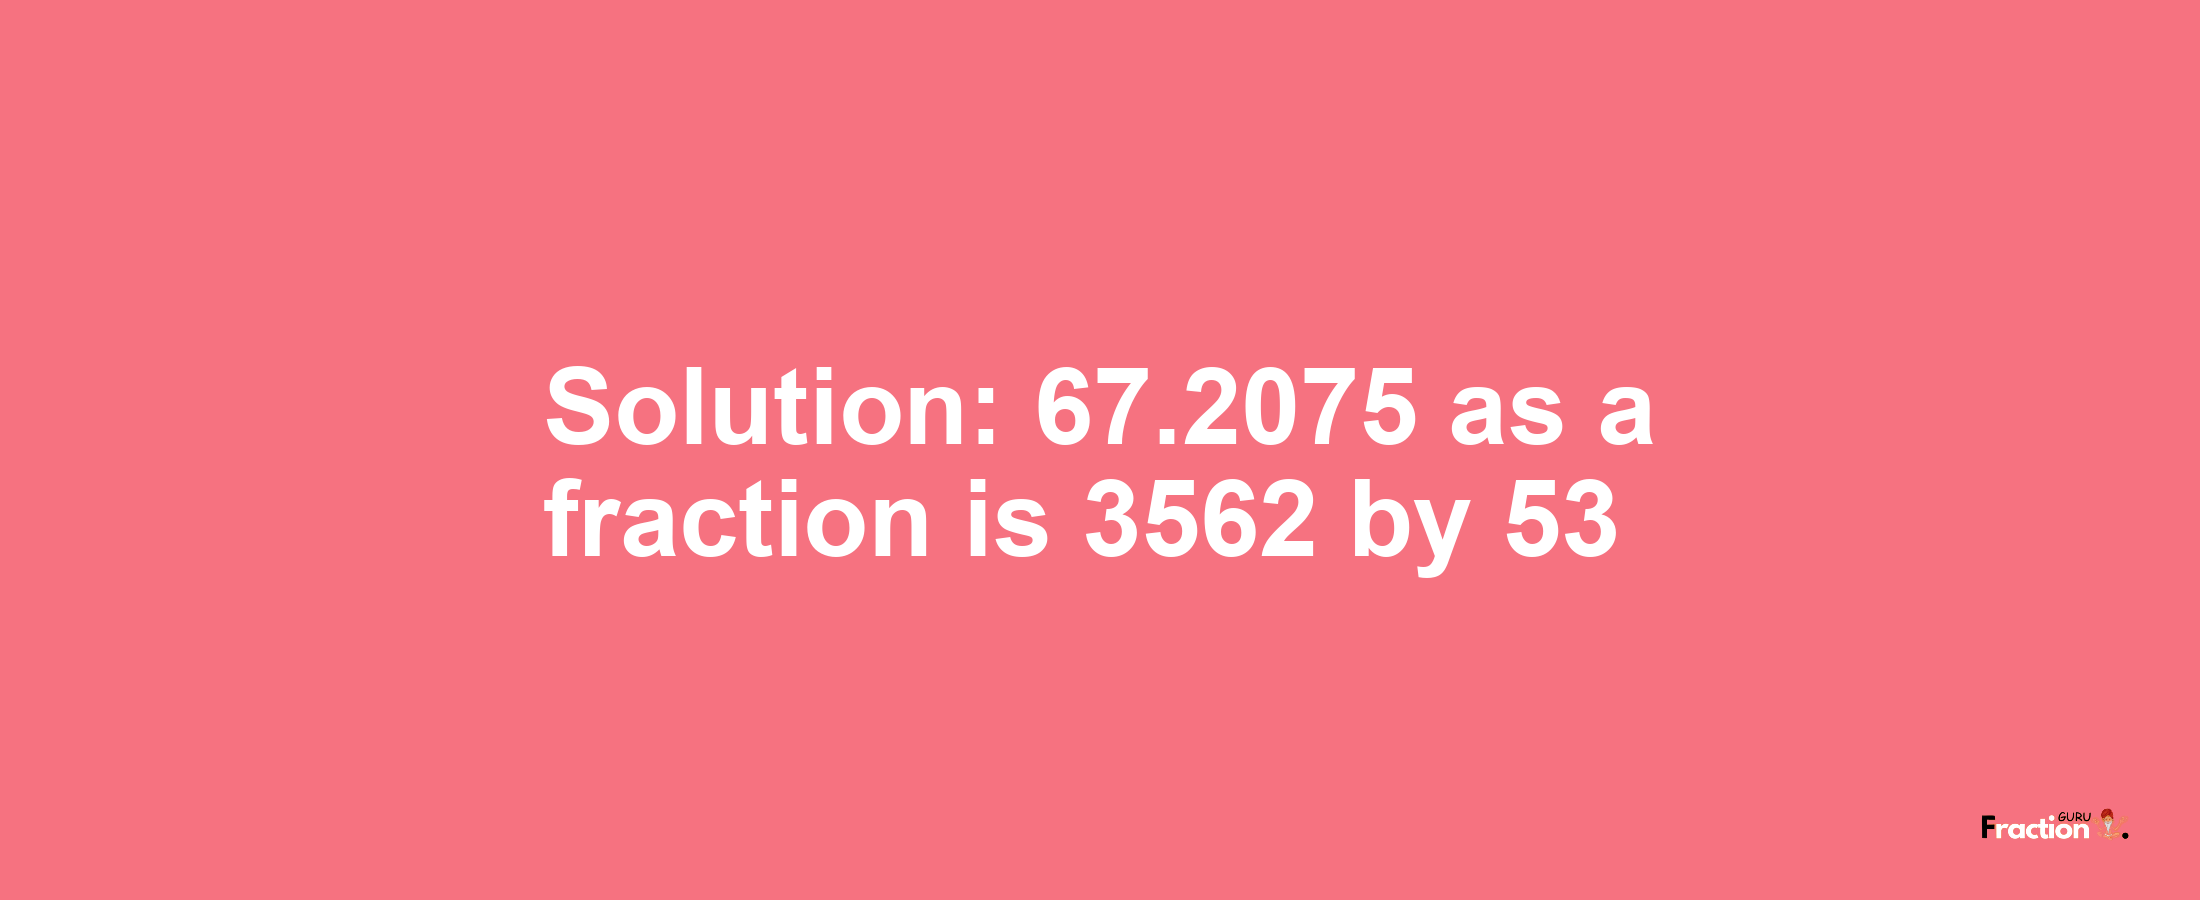 Solution:67.2075 as a fraction is 3562/53